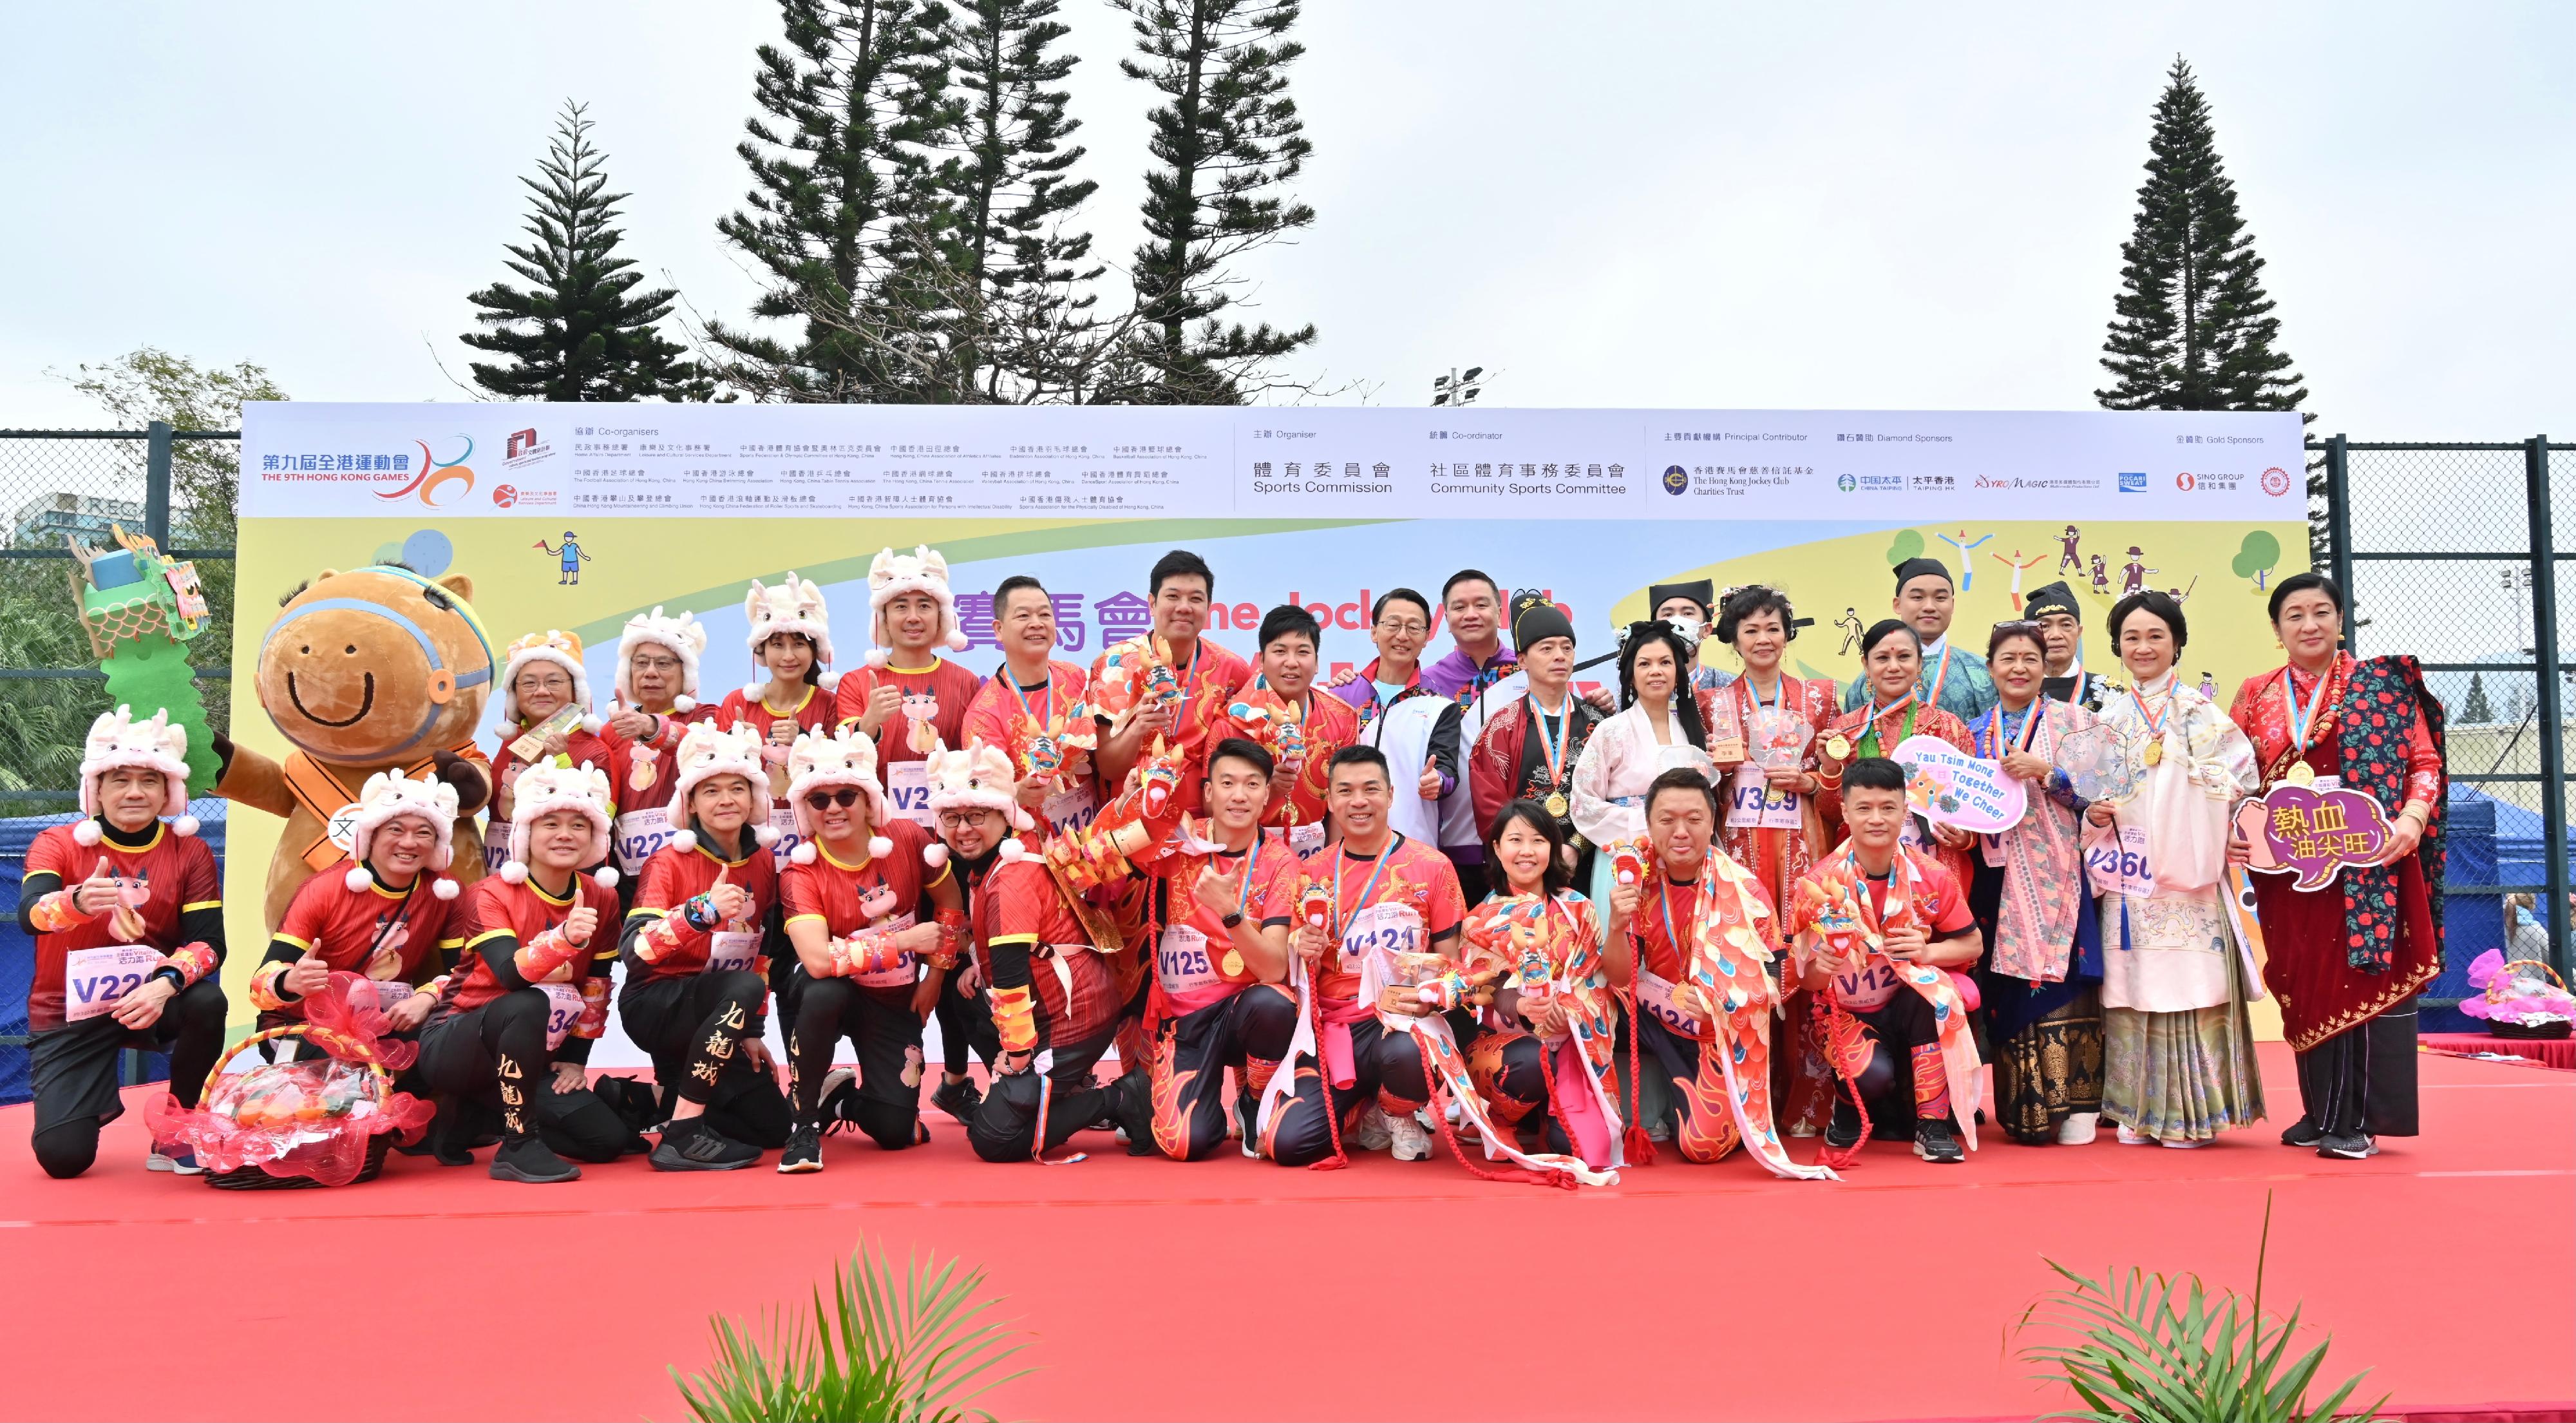 The 9th Hong Kong Games' Jockey Club Vitality Run (HKG) was held alongside the Shing Mun River in Sha Tin this morning (March 3) , runners dressed up and competed for the Costume Prizes. Photo shows the Director of Leisure and Cultural Services, Mr Vincent Liu (back row, ninth left) and the Chairman of the 9th HKG Organising Committee, Professor Patrick Yung (back row, tenth left), with the winning teams of the Overall Best Team Costume Prizes.